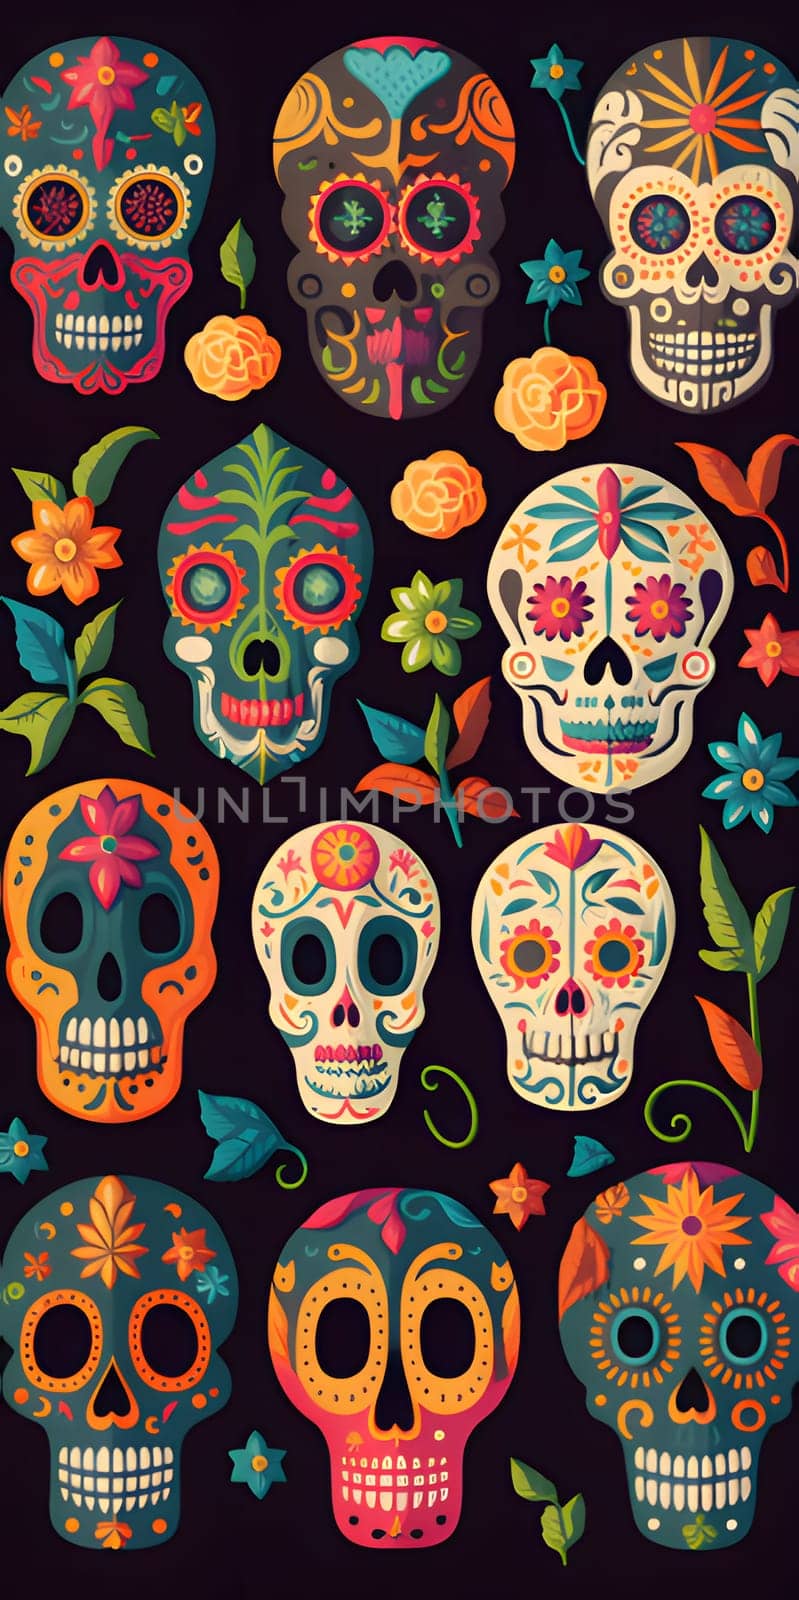 Elegant and modern. Human skulls decorated with paint, flowers. as abstract background, wallpaper, banner, texture design with pattern - vector. Dark blue colors.